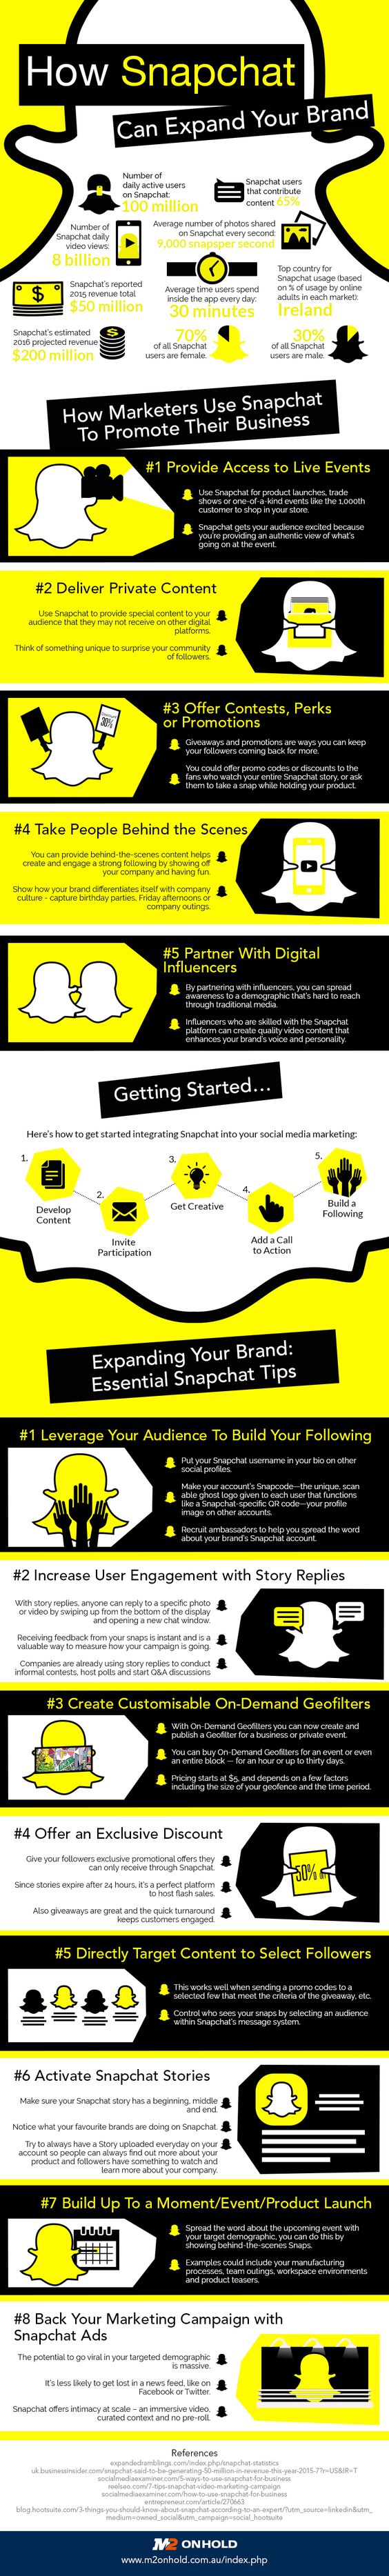 How Snapchat Can Expand Your Brand